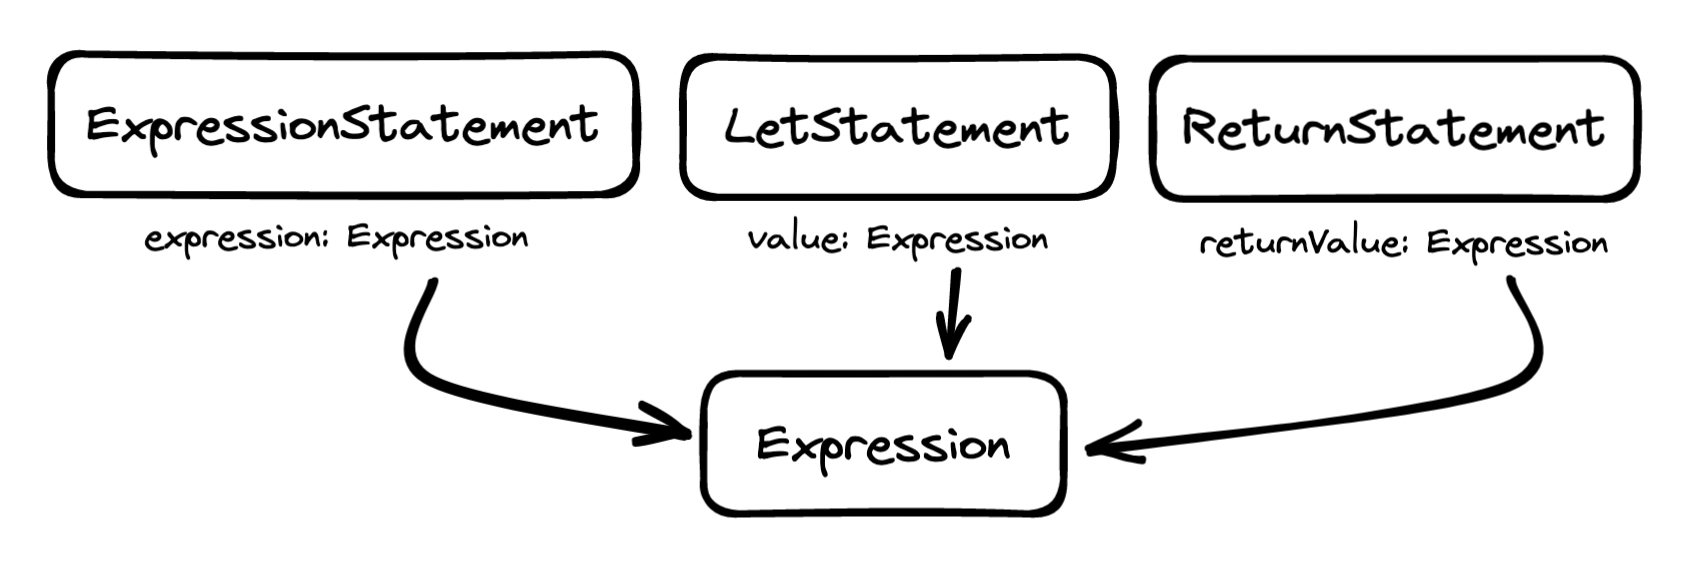 Statements refer to expressions